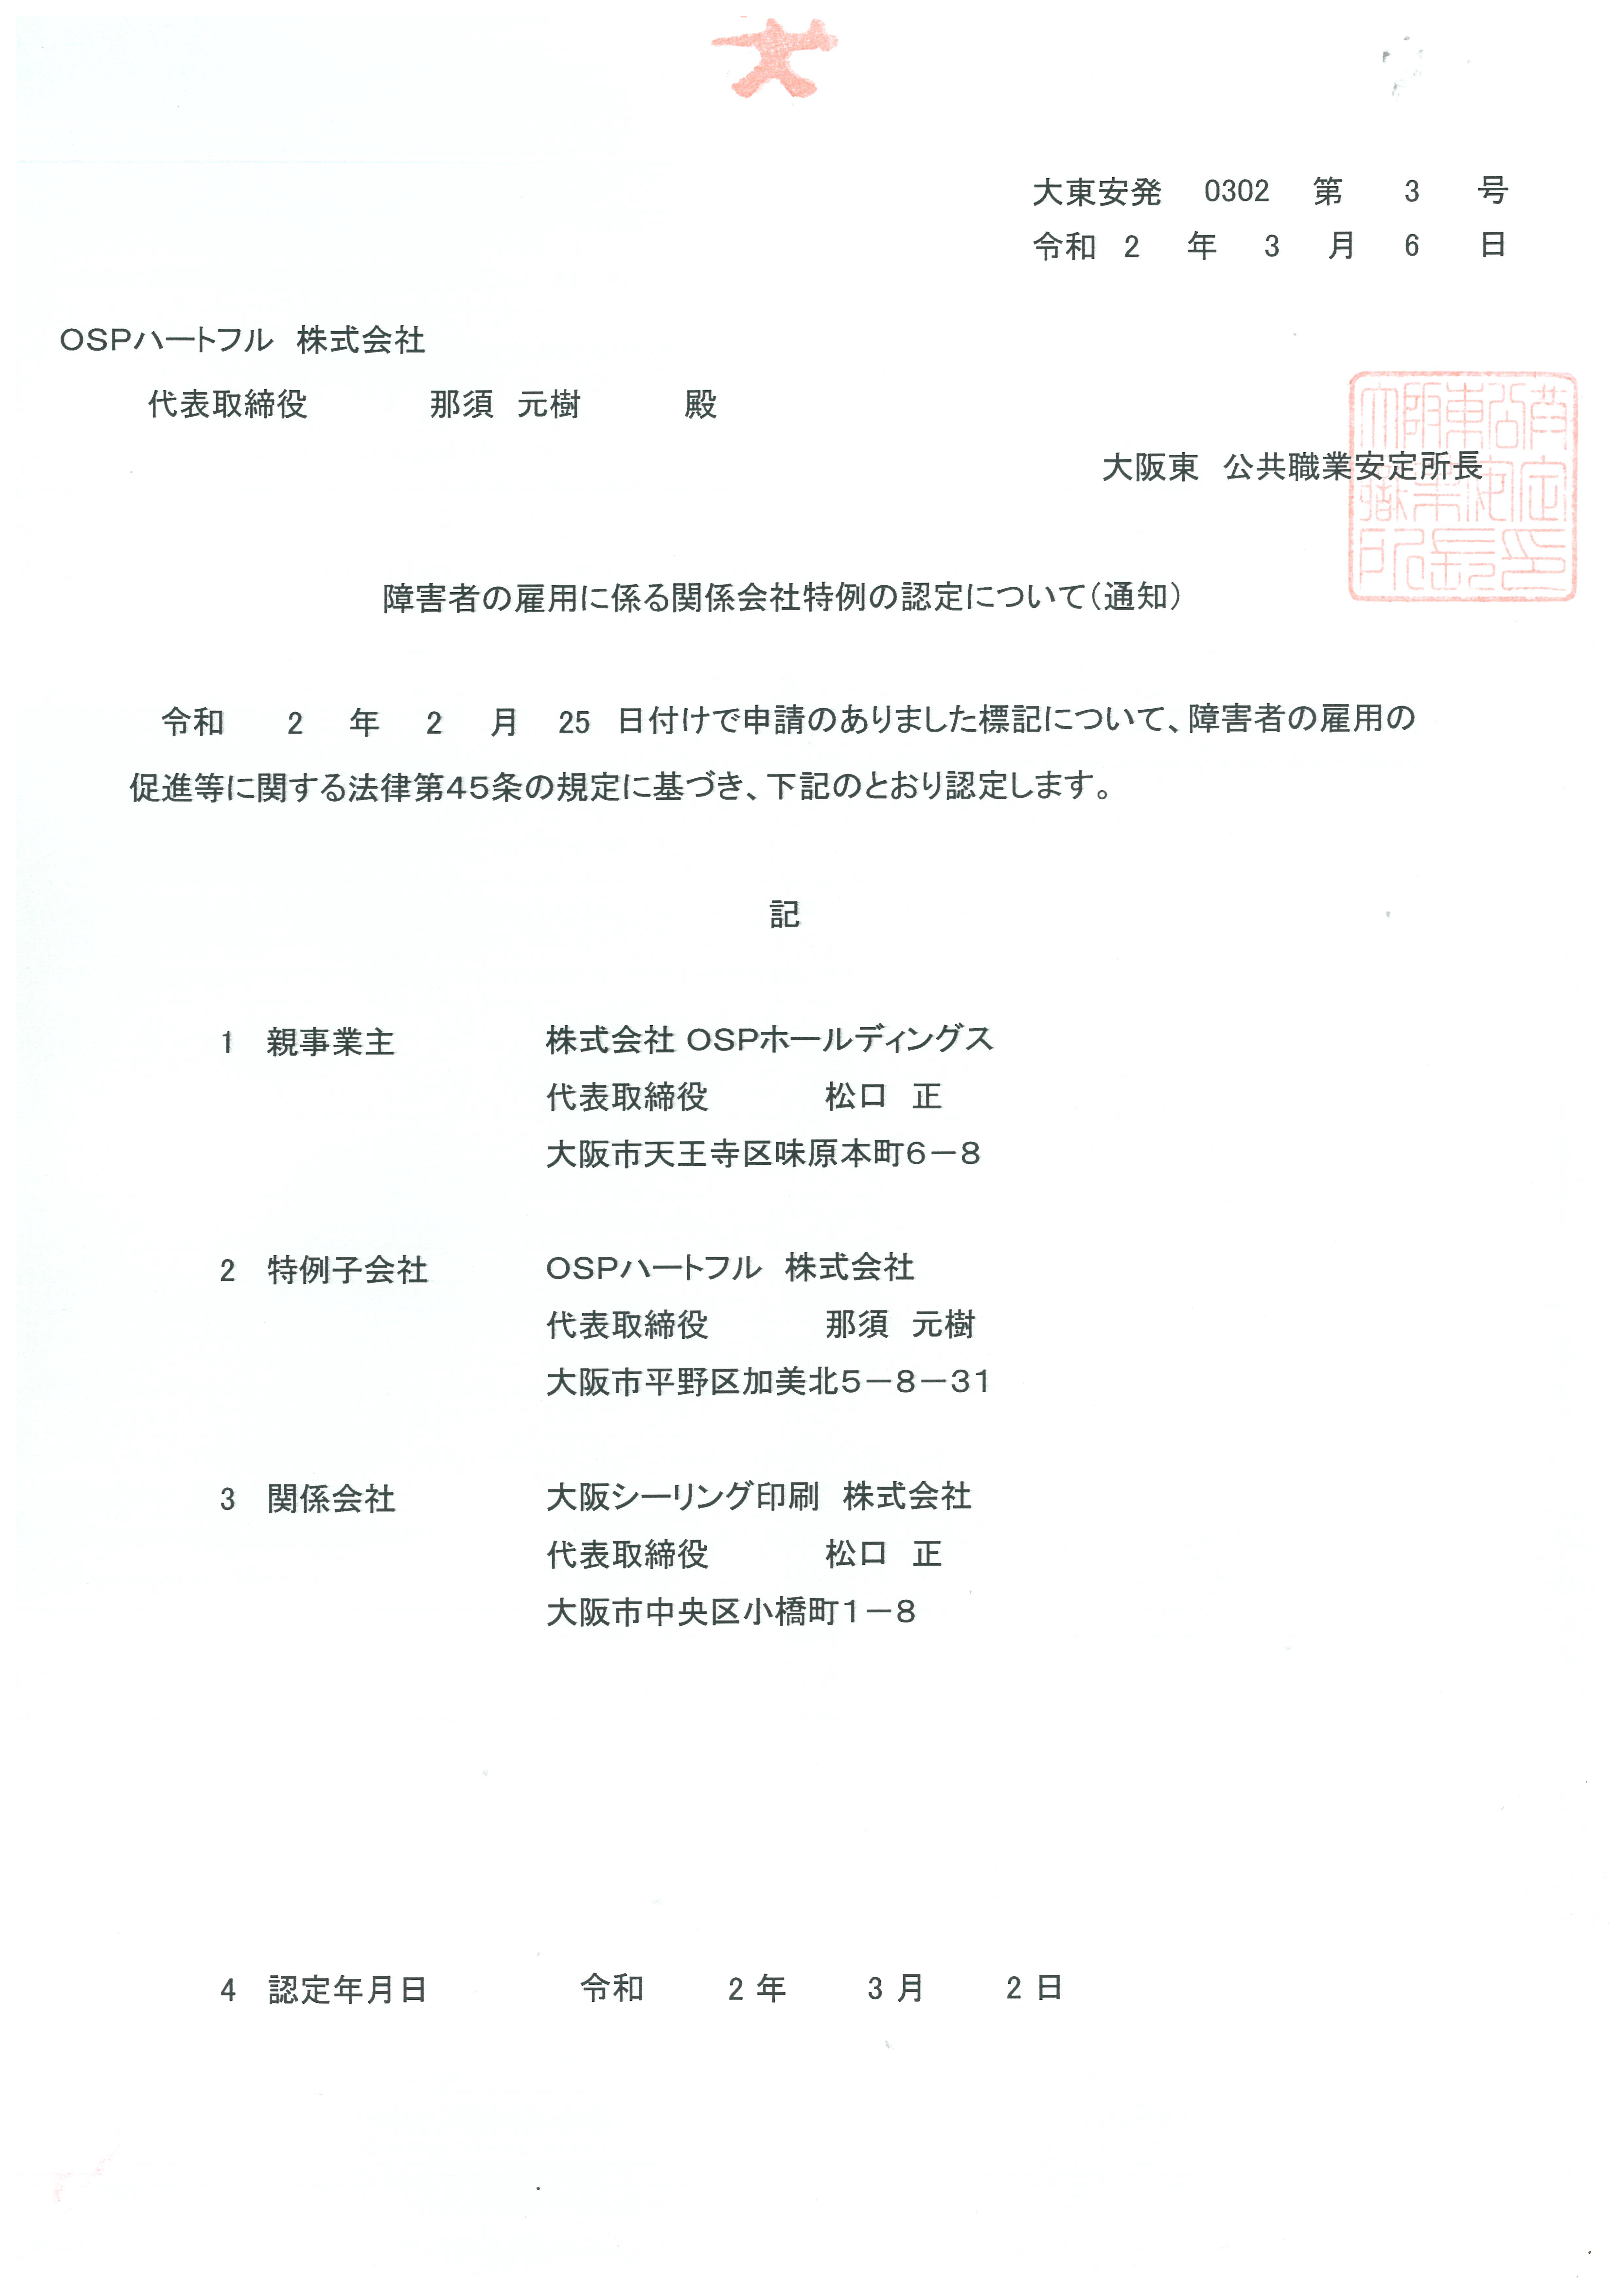 OSP Halftful Co., Ltd. Special Subsidiary Company Certificate